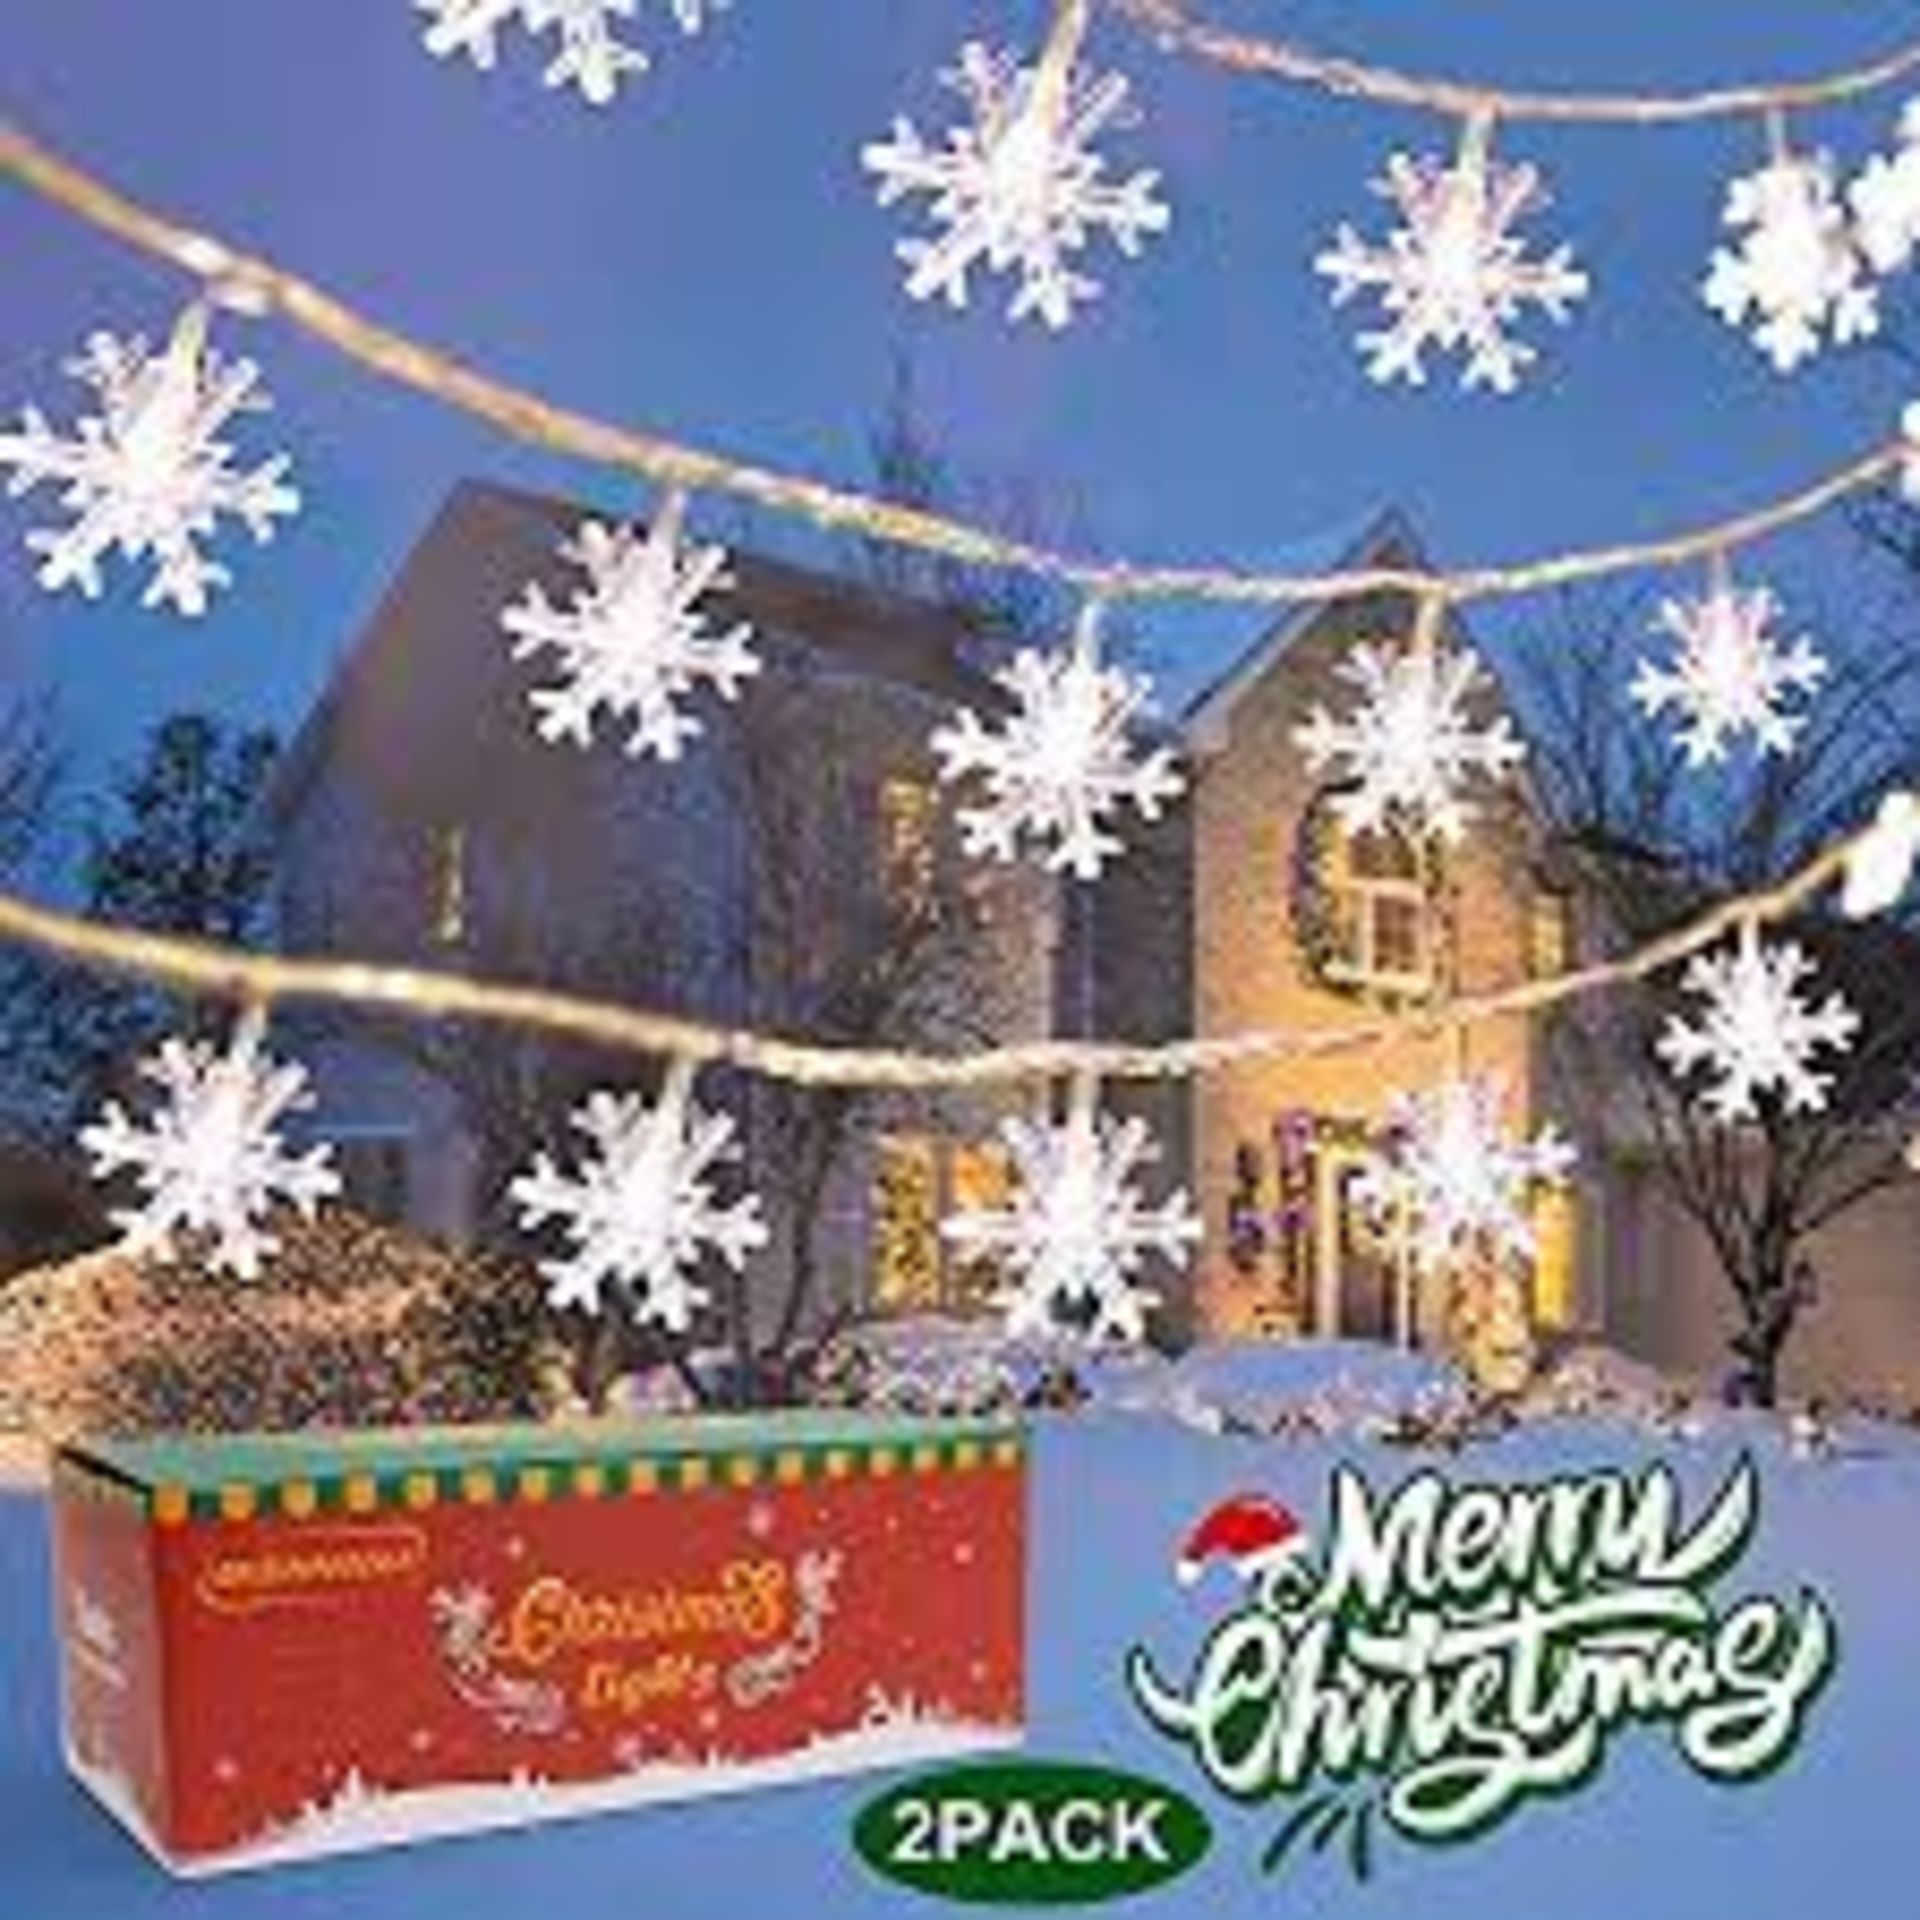 15 x NEW BOXED PACKS OF 2 BANNILU 80LED 40ft Snowflake String Lights Battery Operated Waterproof